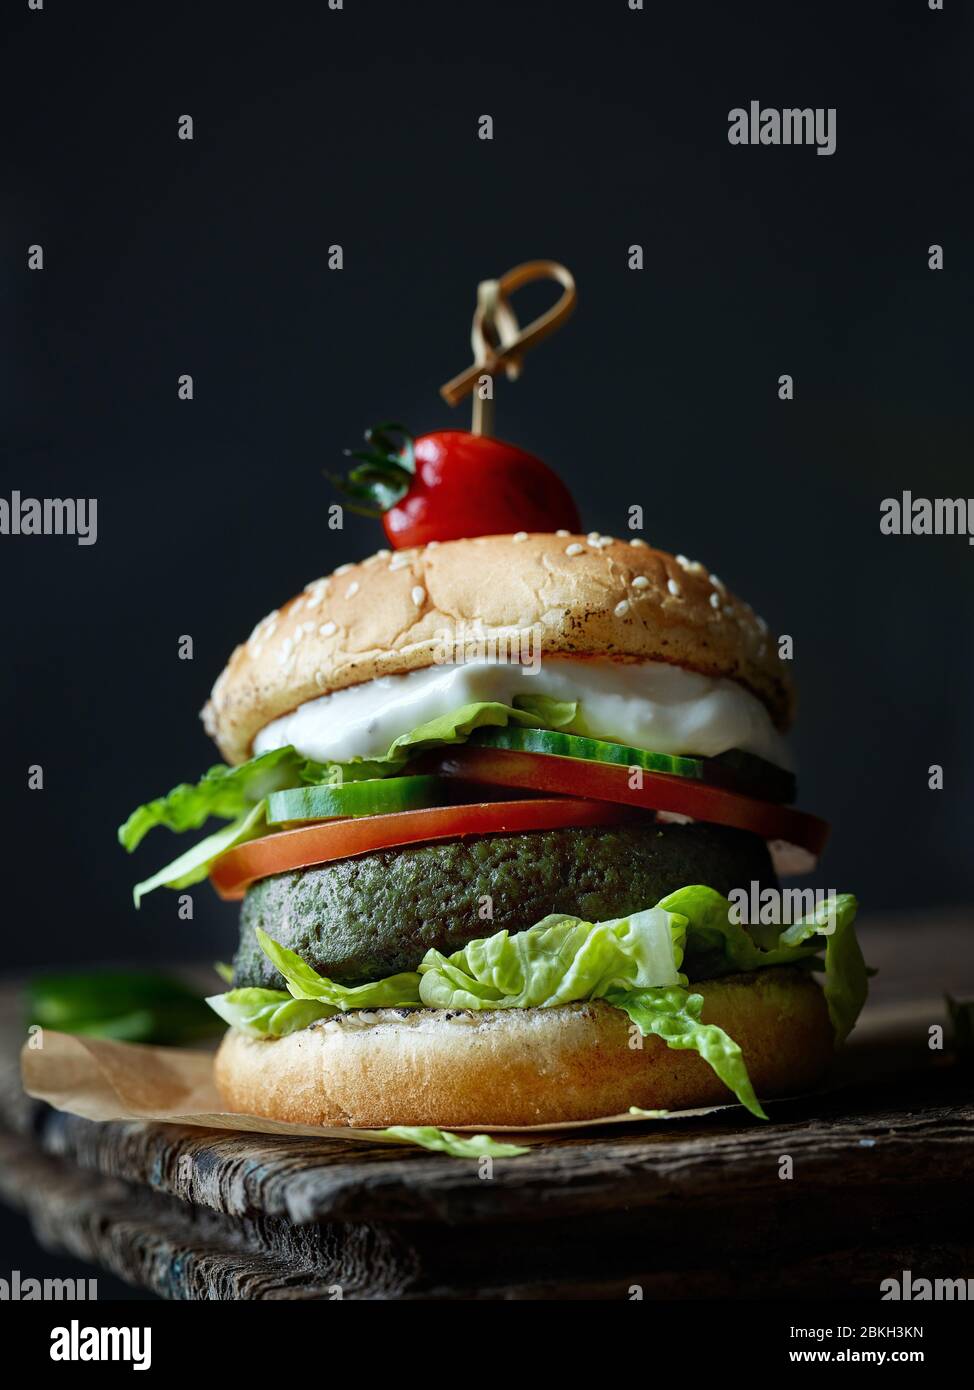 fresh tasty meat free burger on old dark wooden table Stock Photo